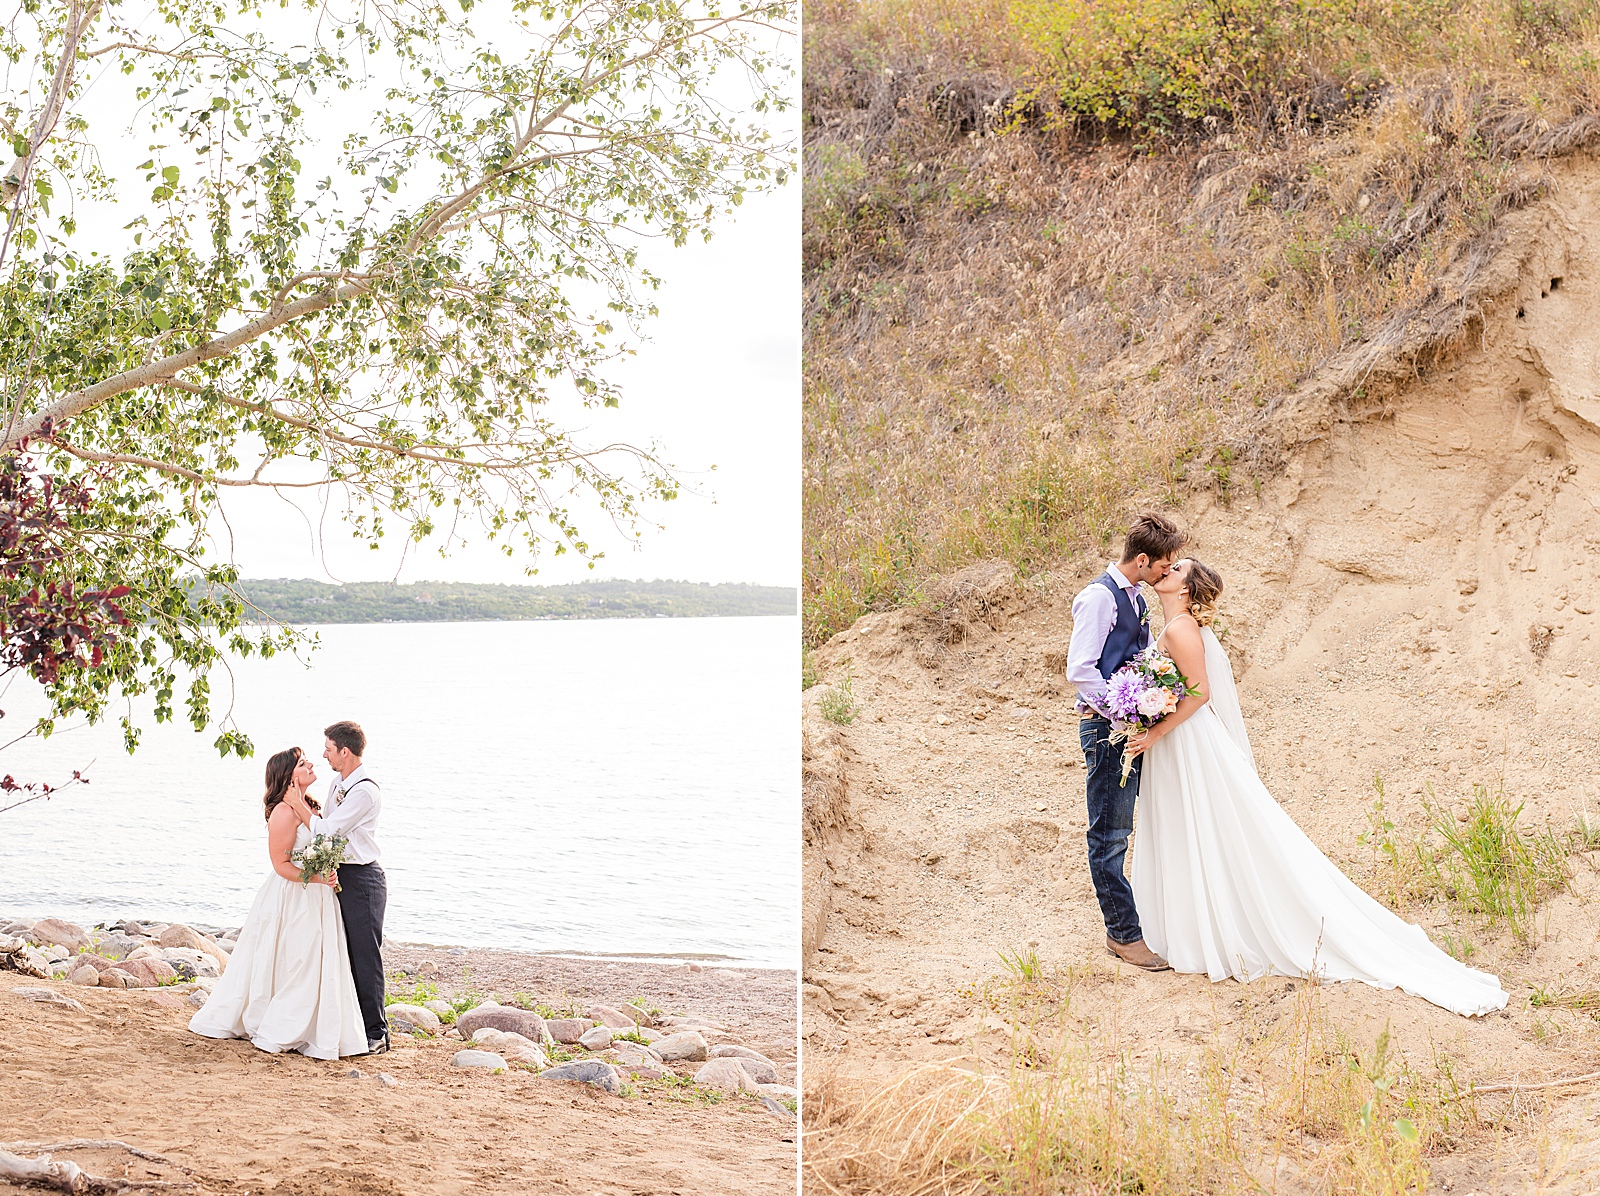 Bride and groom eloping in Saskatchewan at a beach and on the sand